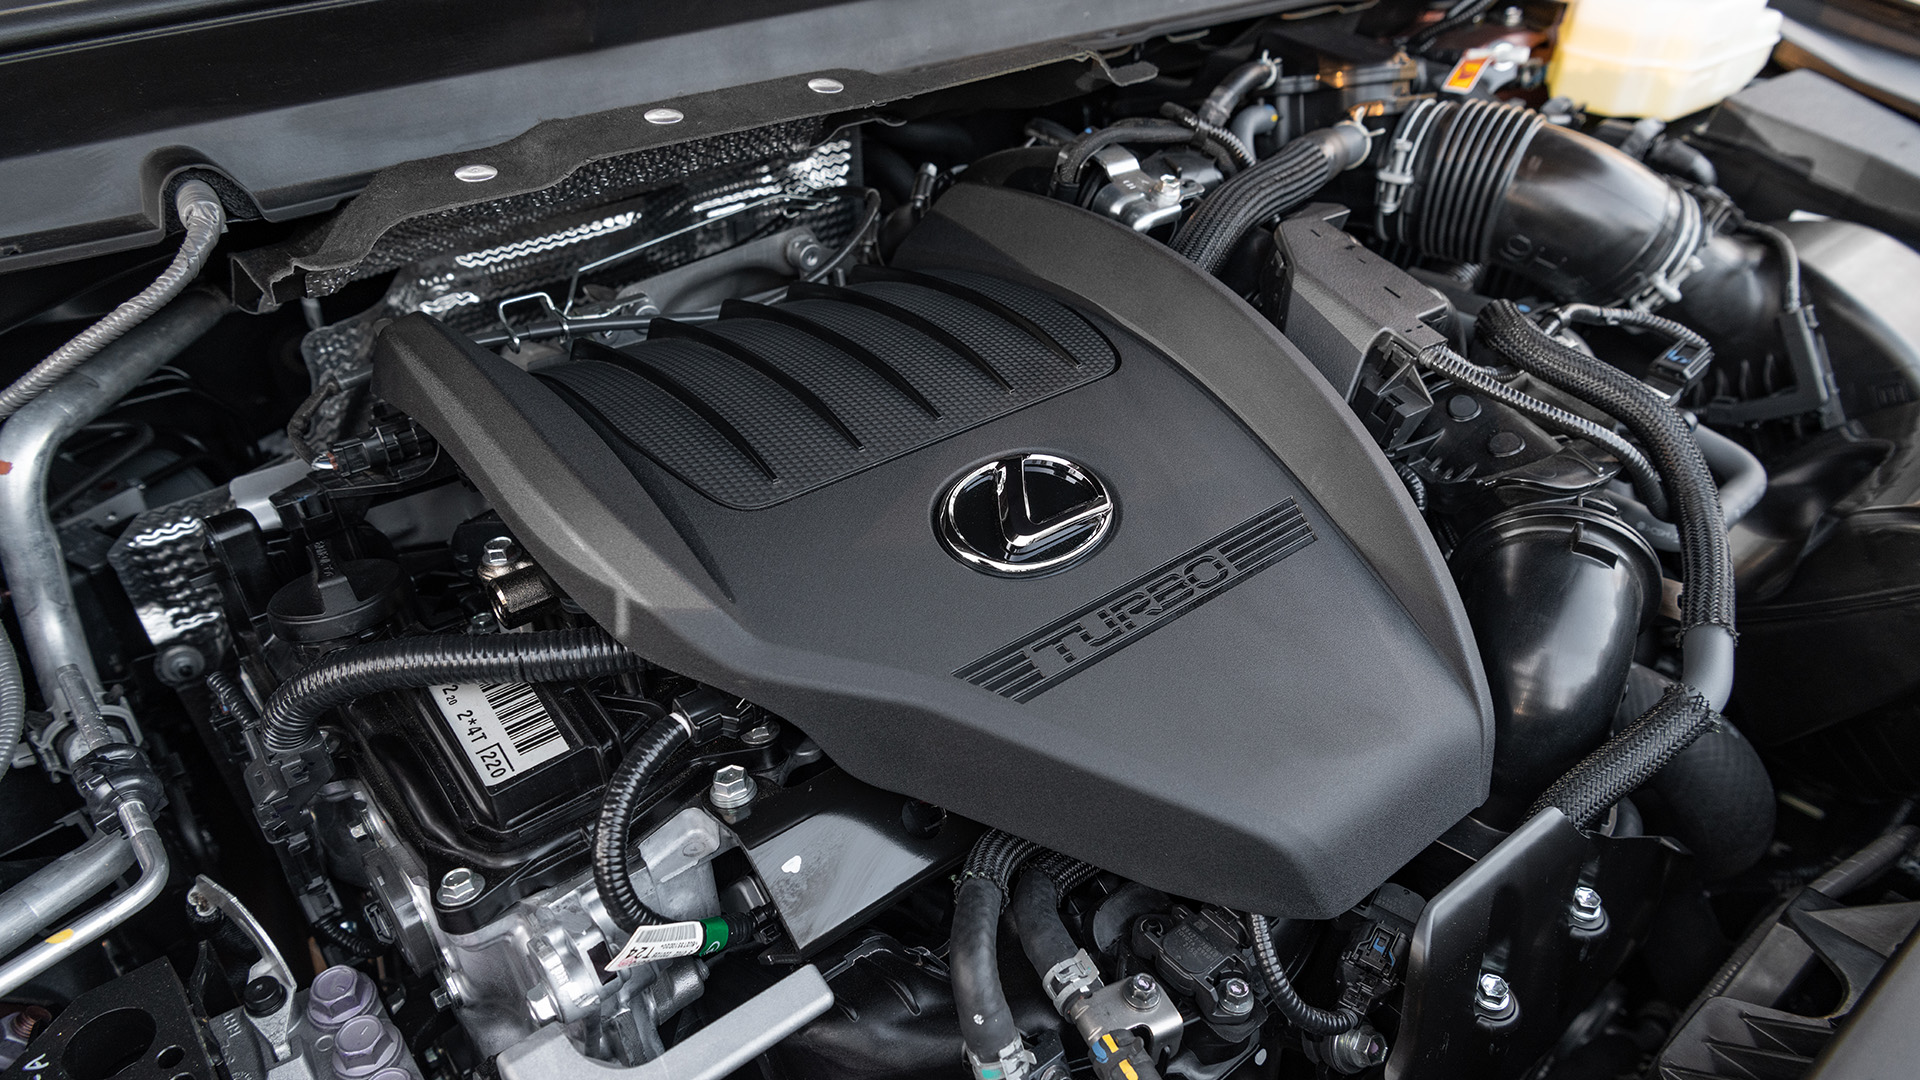 The engine bay of the RX, with the engine cover marked with the lexus logo and the word turbo. 